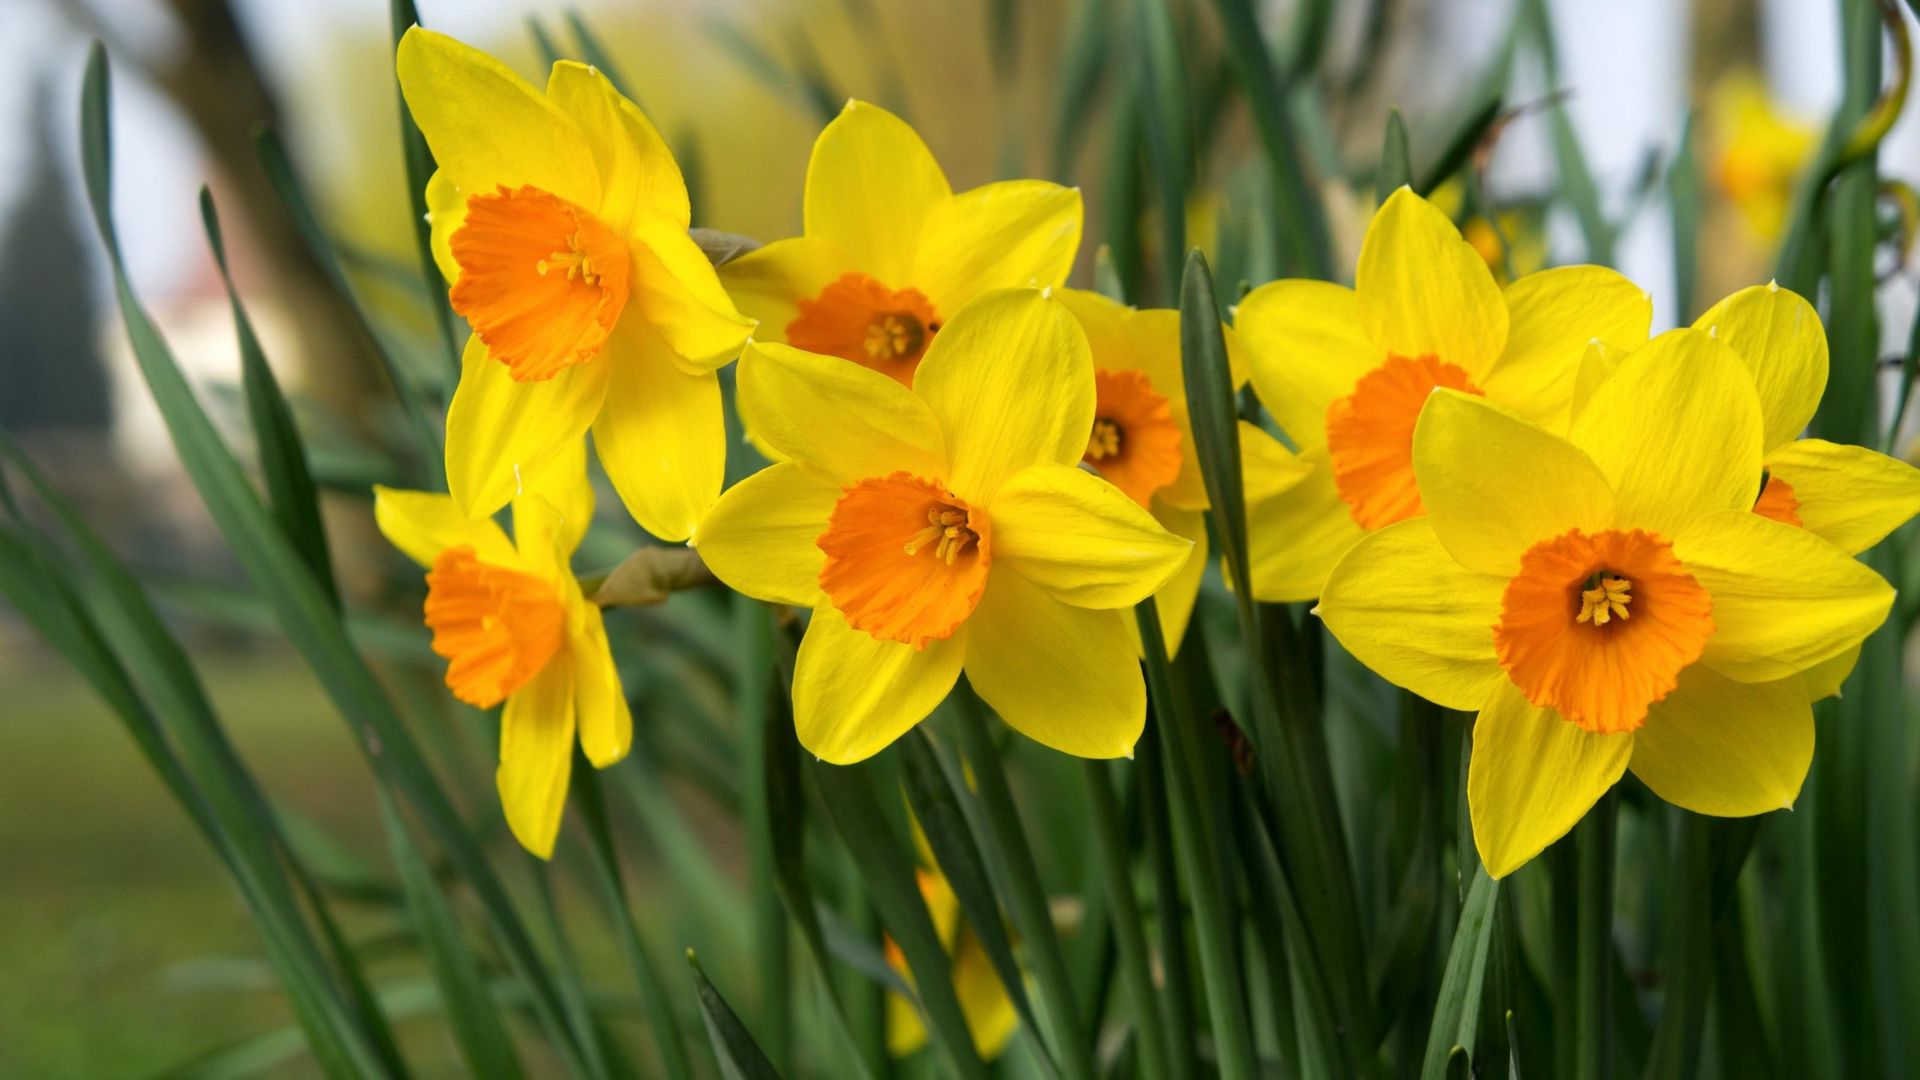 Download wallpaper 1920x1080 daffodils, flowers, bright, flowerbed ...